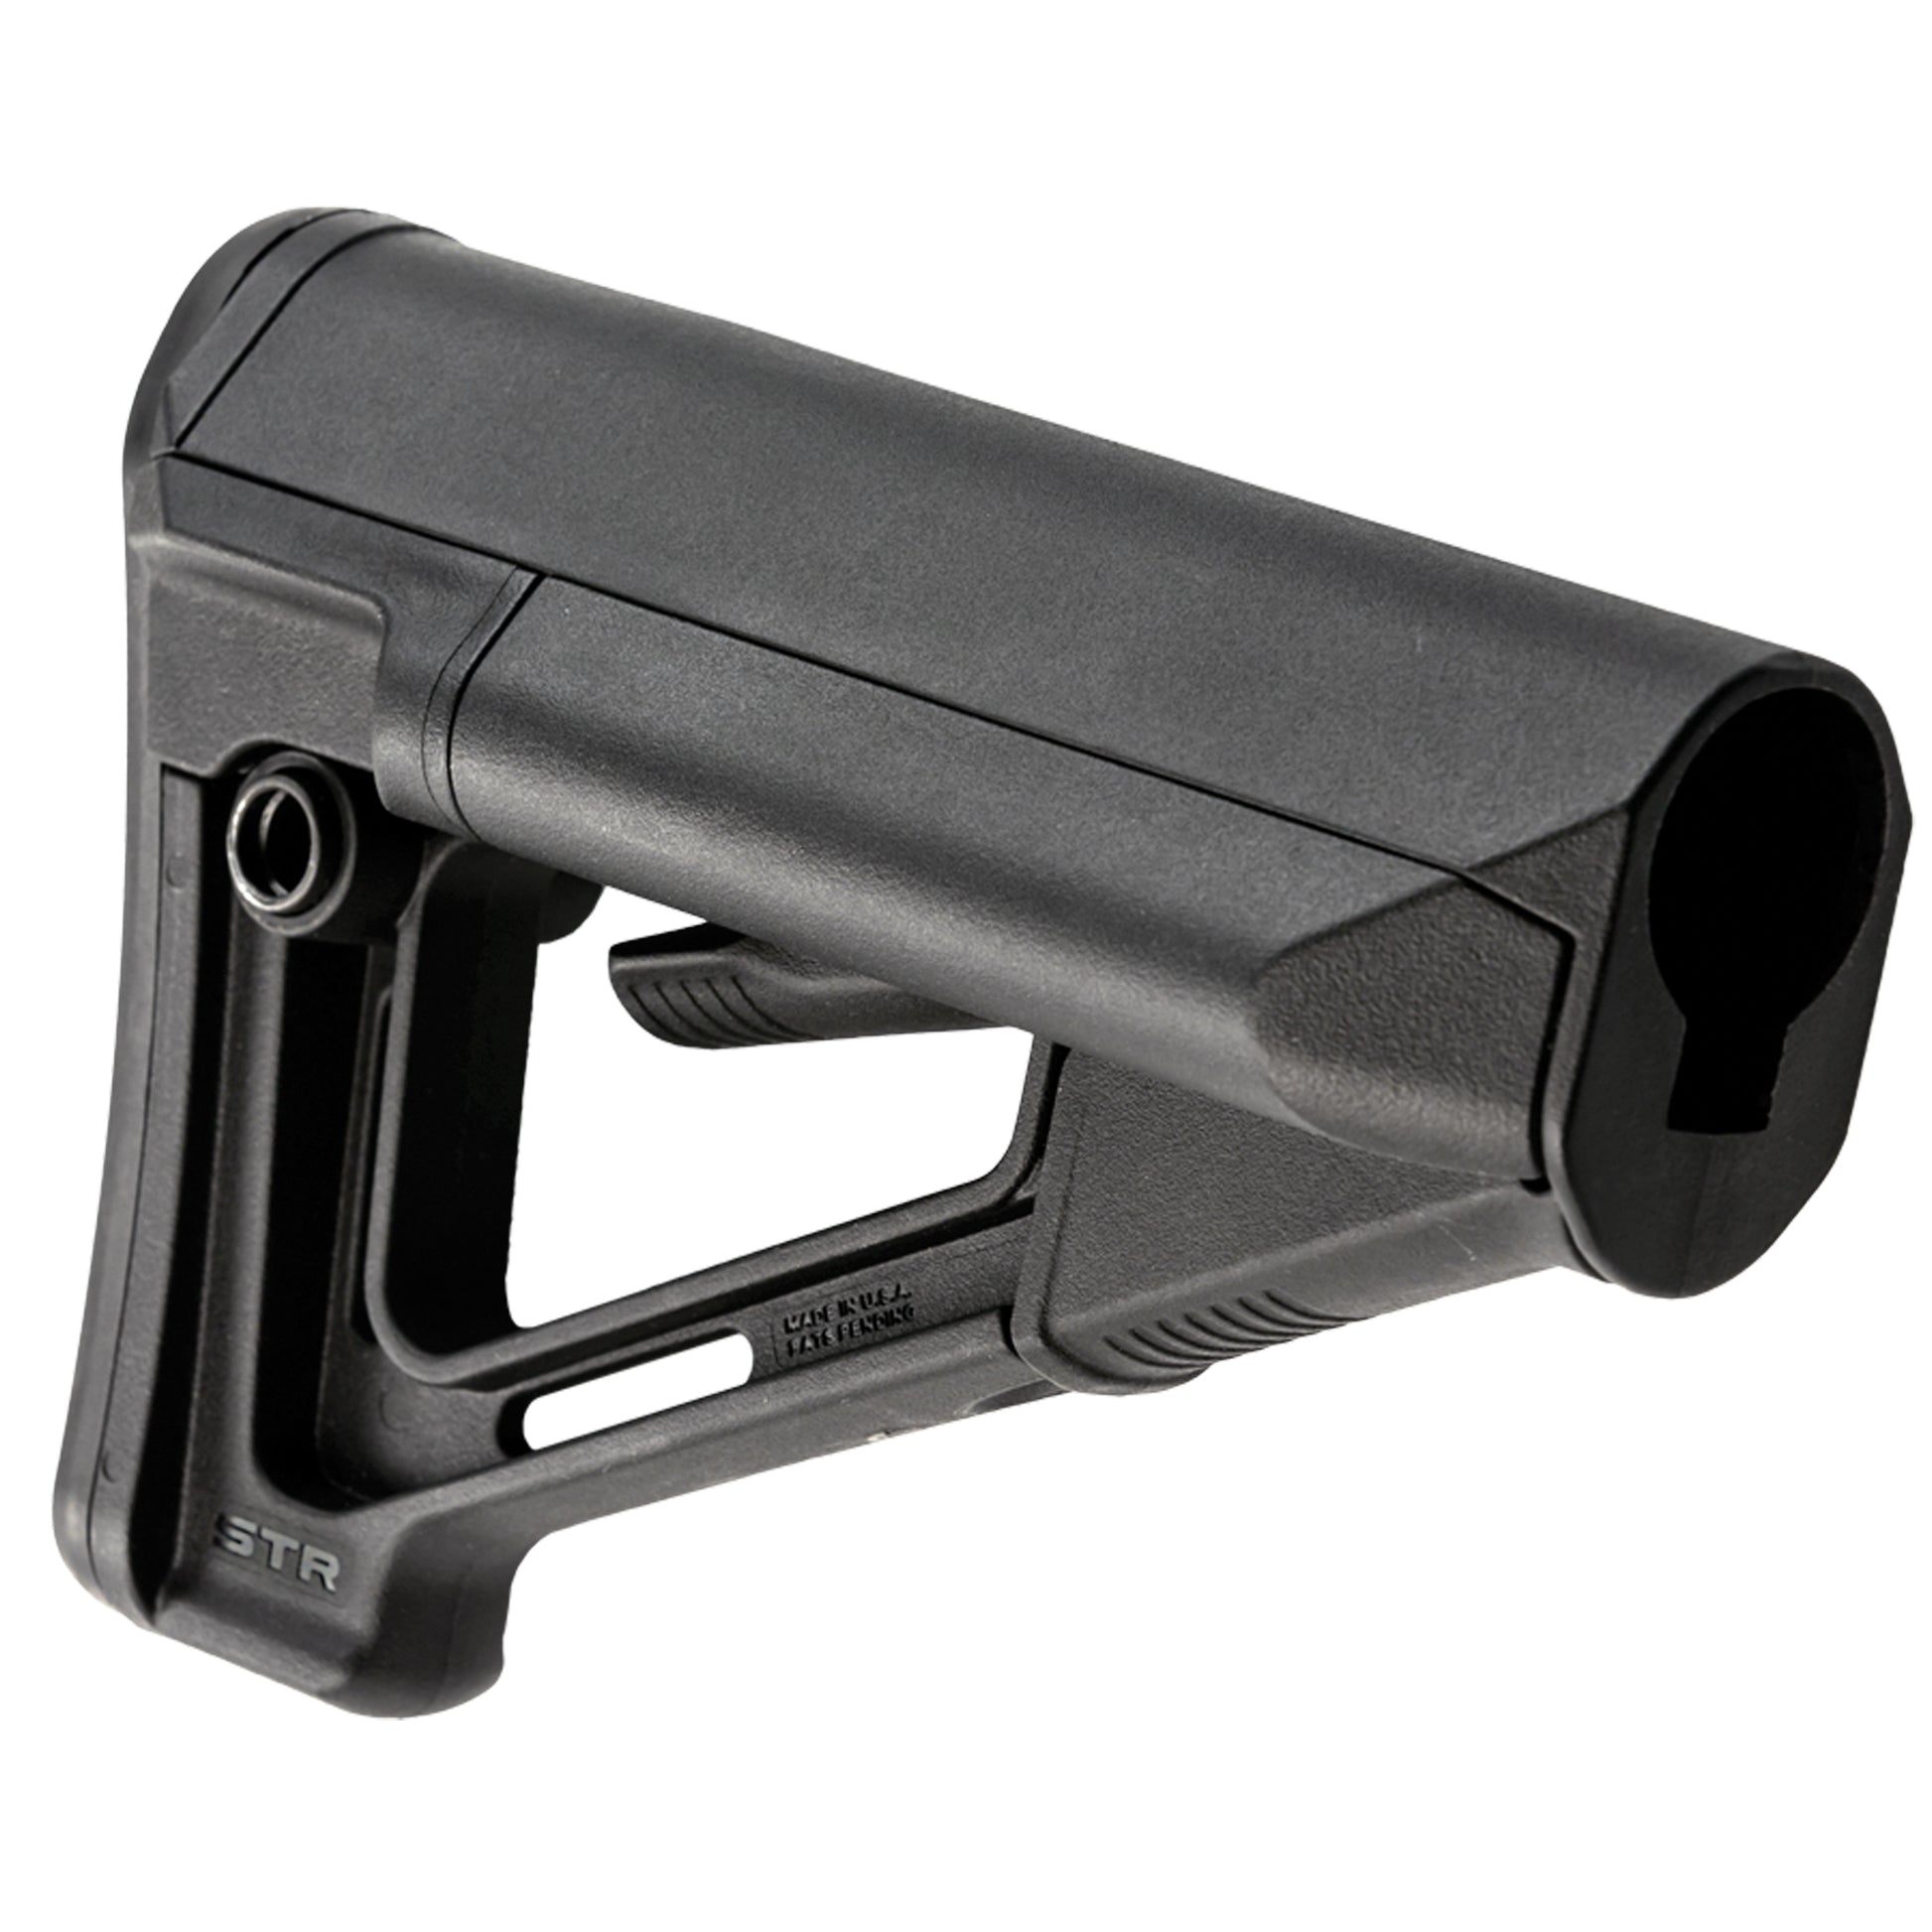 Magpul Industries STR Stock Fits AR-15 Mil-Spec drop-in buttstock MAG470-BLK - California Shooting Supplies